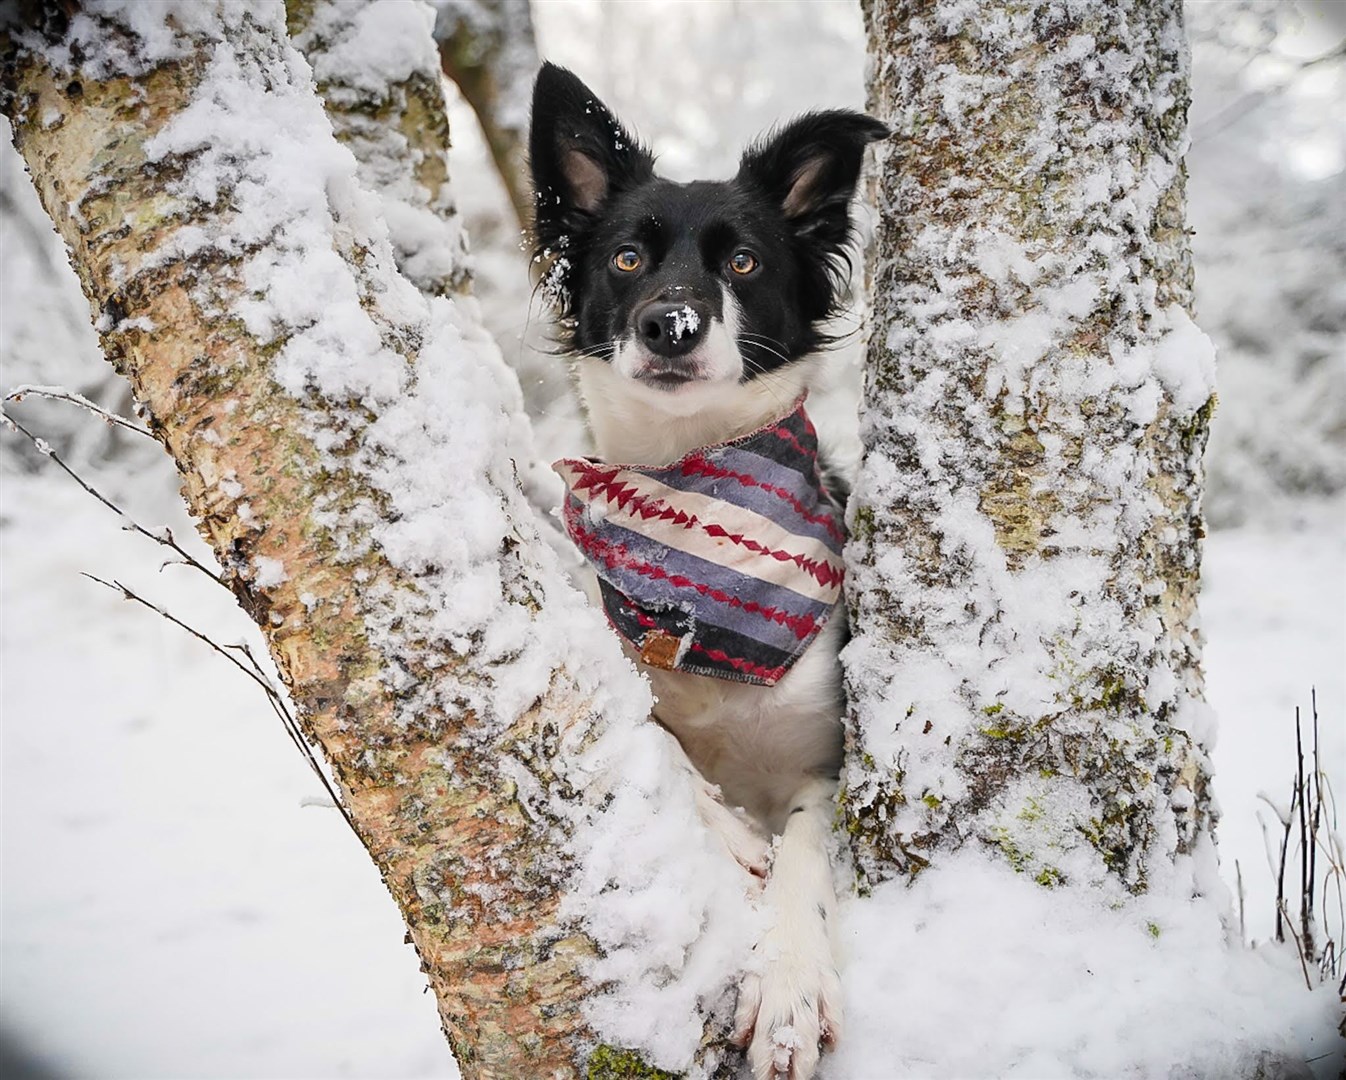 Reader Tsara Cole took these photos of dogs in the Highlands.